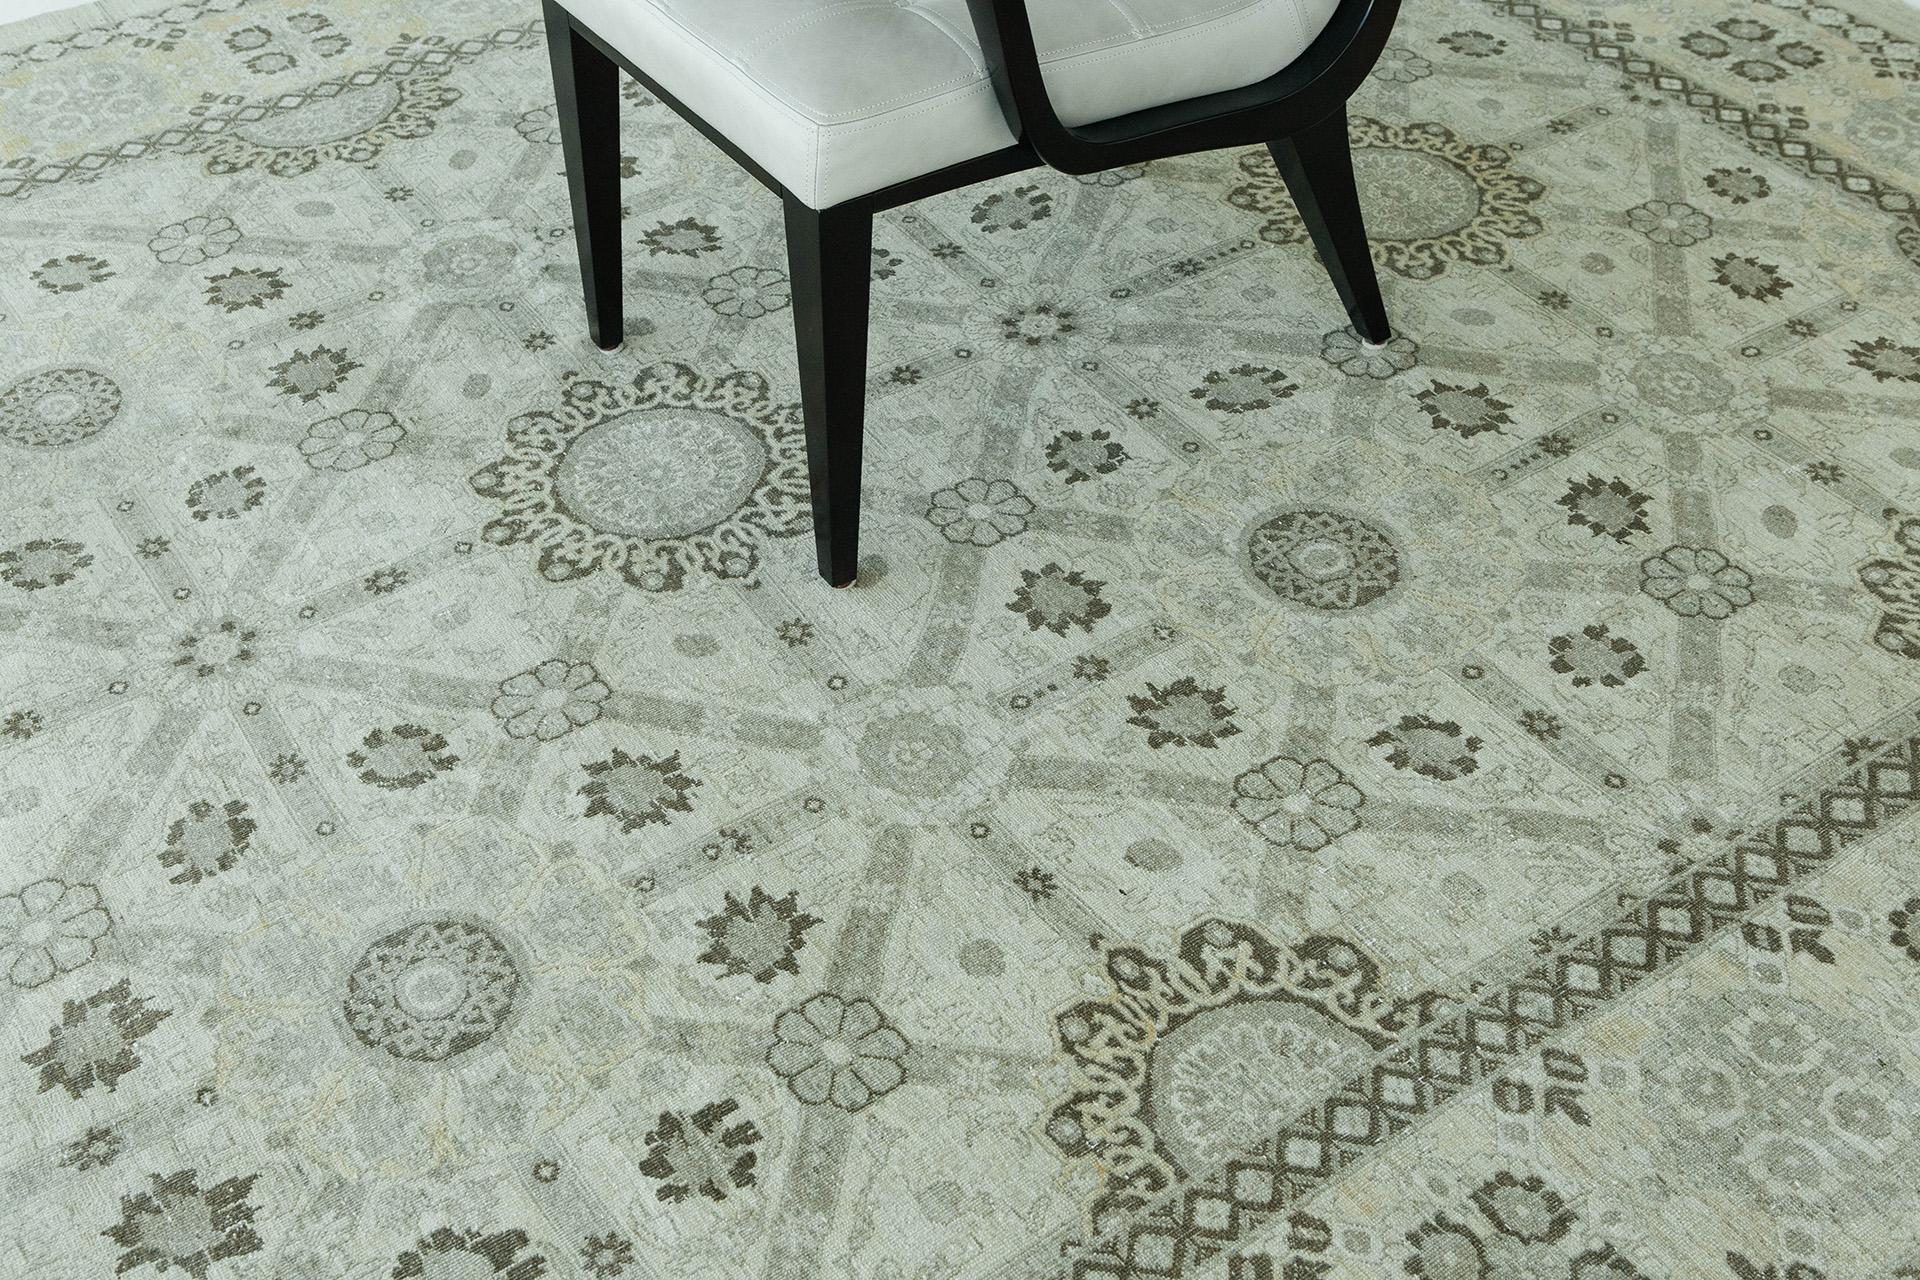 With this elegant and sophisticated Vintage Style Arts and Crafts rug, you can give your living room the ultimate makeover. This rectangular rug is made of wool and features a diamond trellis pattern with complex motifs all over against a soft beige